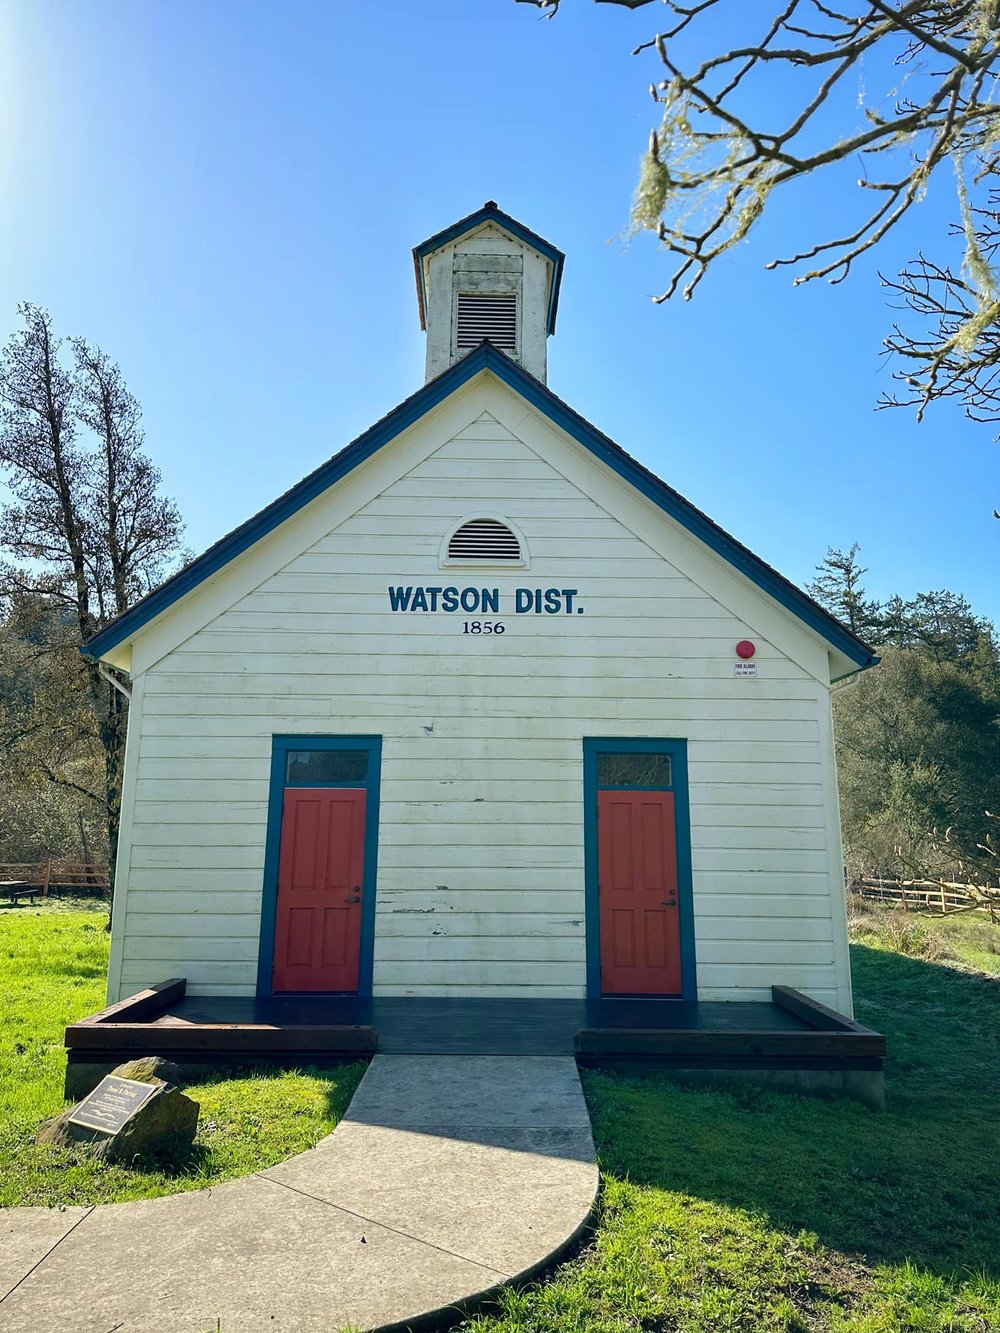  When you travel slowly you have time to stumble on fascinating places such as this 1850s one-room schoolhouse in Bodega, which gives a very Accidentally Wes Anderson kind of vibe. Nearby there’s a plaque commemorating a Christo art installation the 